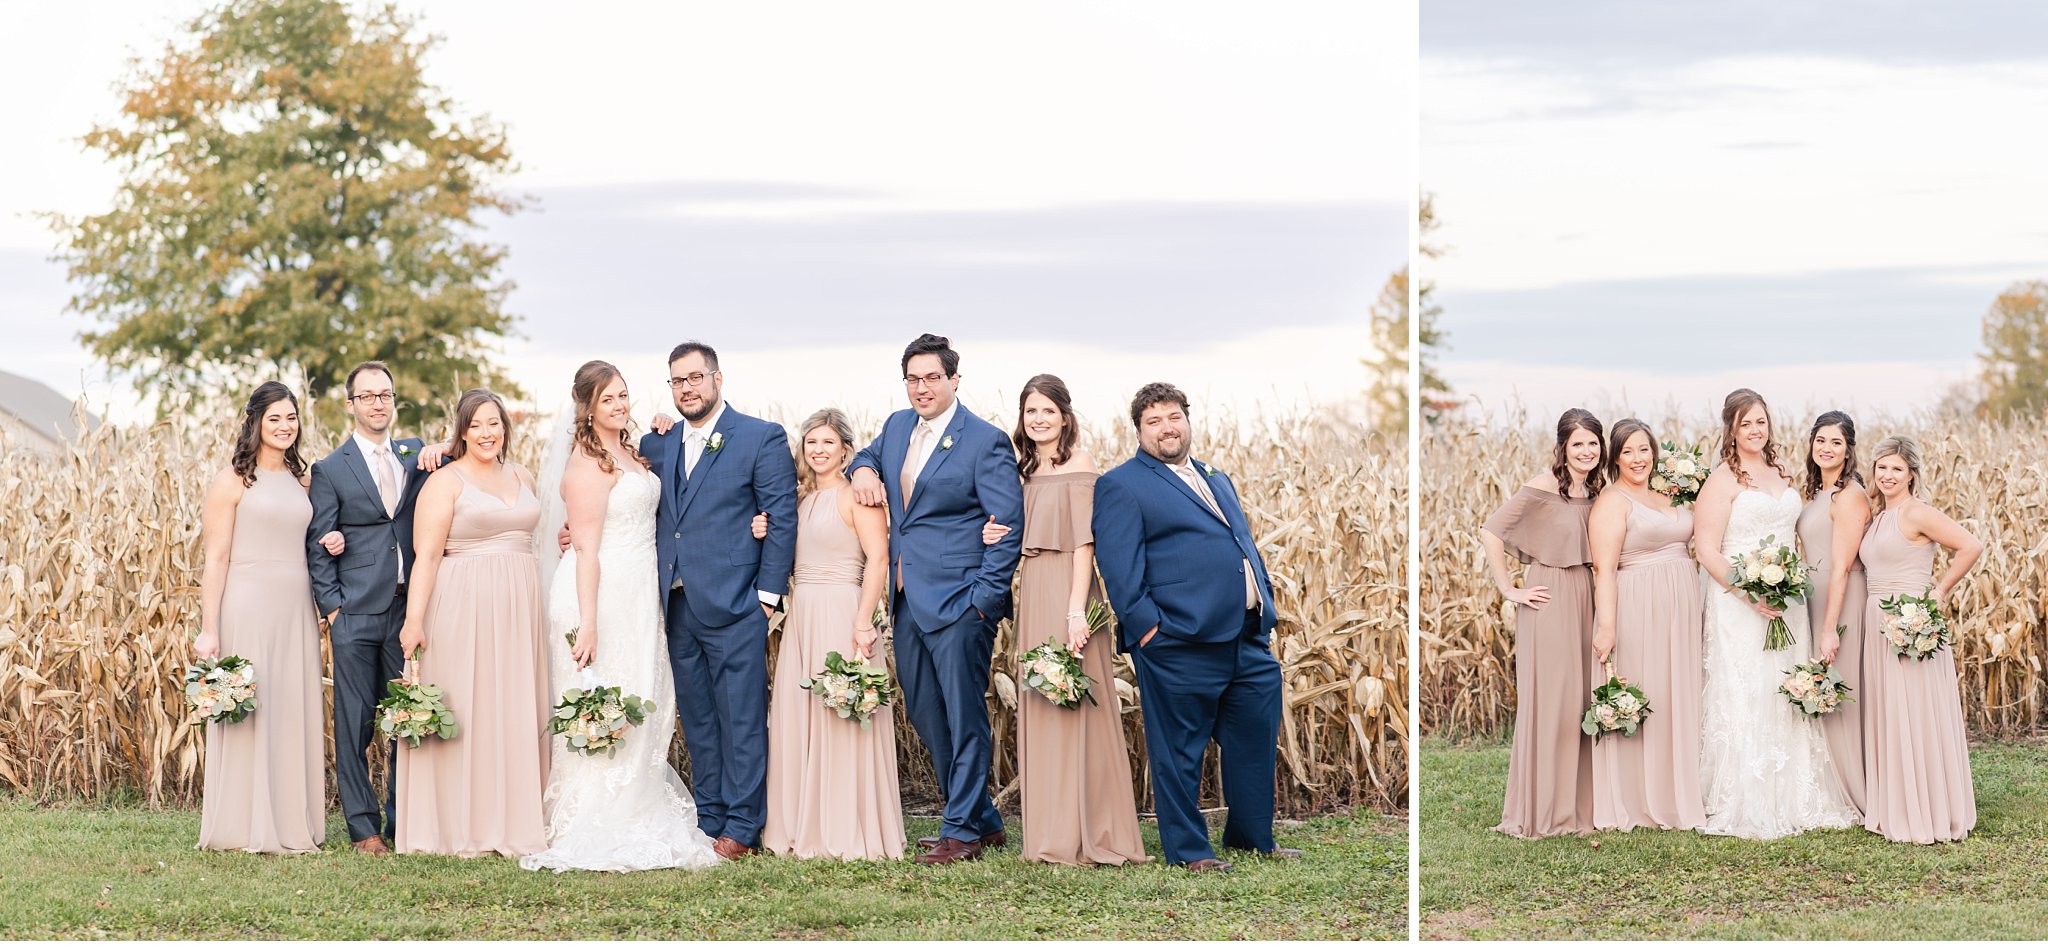 wedding party in a cornfield at sunset